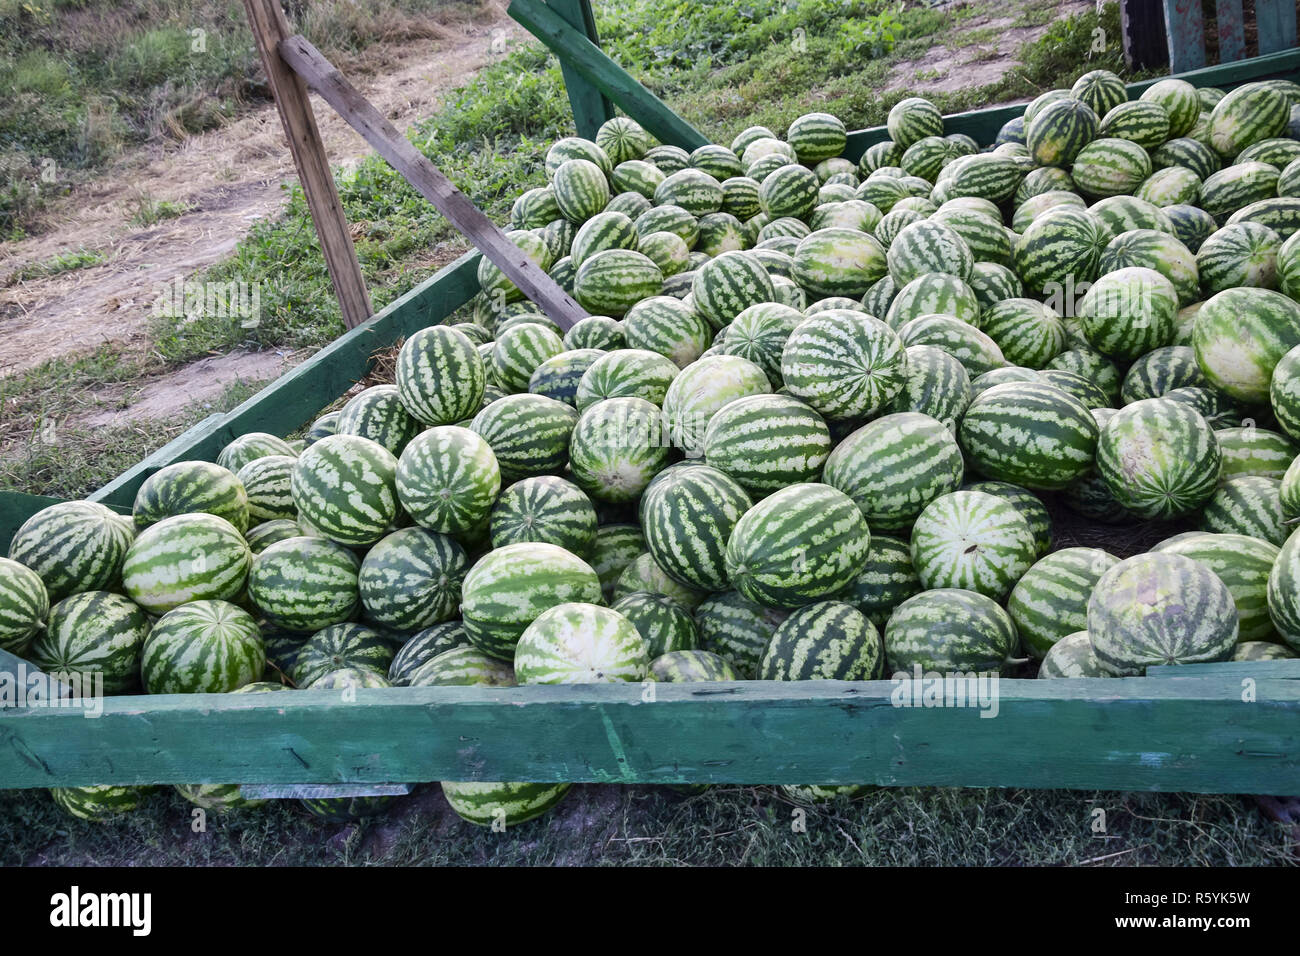 Collected in a pile of melons and watermelons Stock Photo